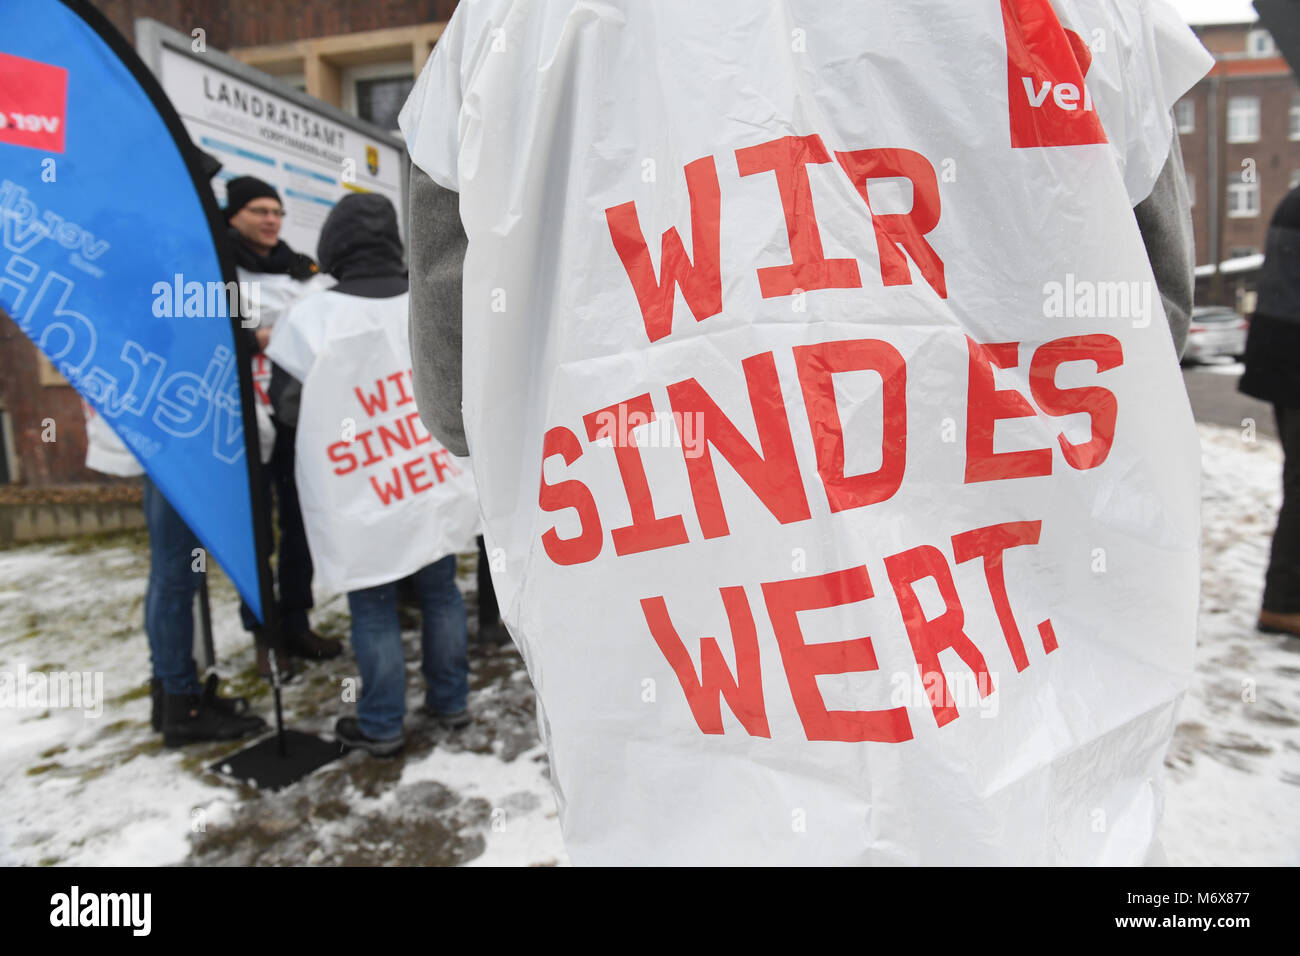 07 March 2018, Germany, Stralsund: The writing on the bib reads 'We are worth it' as public service staff gather in front of the district office of county Western Pomerania and Ruegen for a warning strike. The first round of wage and salary negotiations for the nationwide 2, 3 million public service emplyees has ended without an offer from public service employers more than a week ago. Photo: Stefan Sauer/dpa Stock Photo